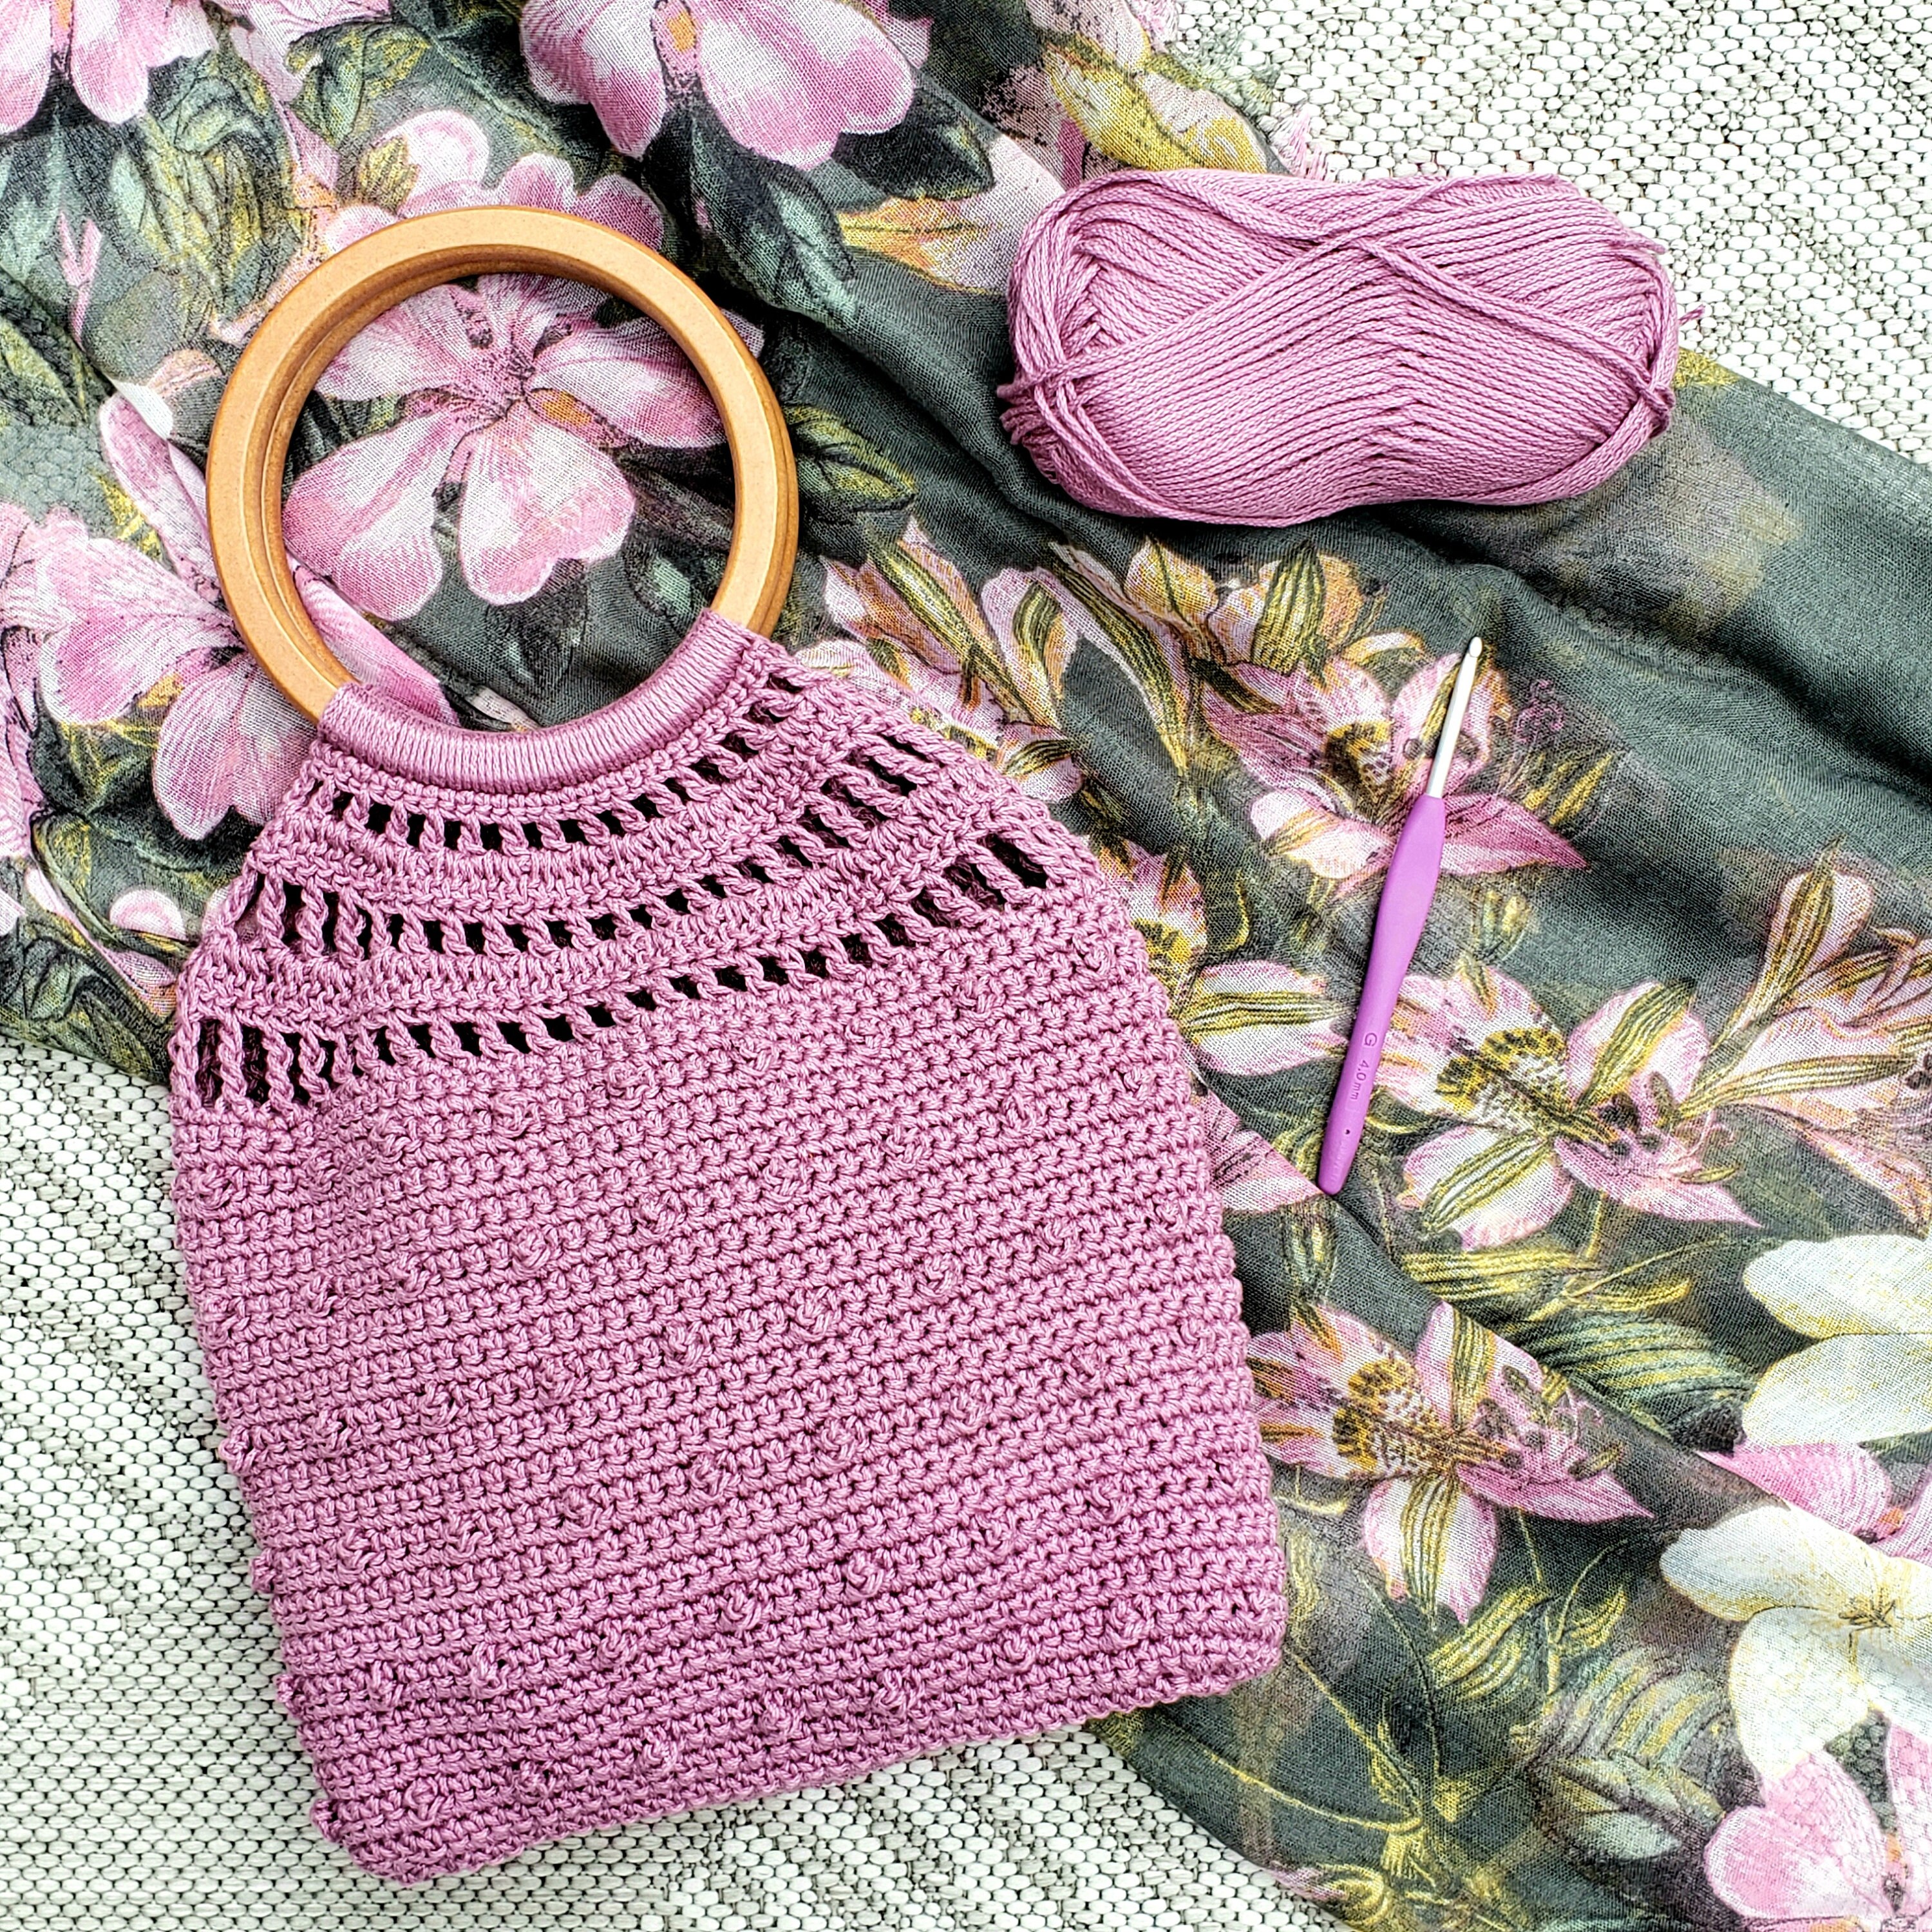 Ravelry: oldie's Crochet Purse with Round Handles